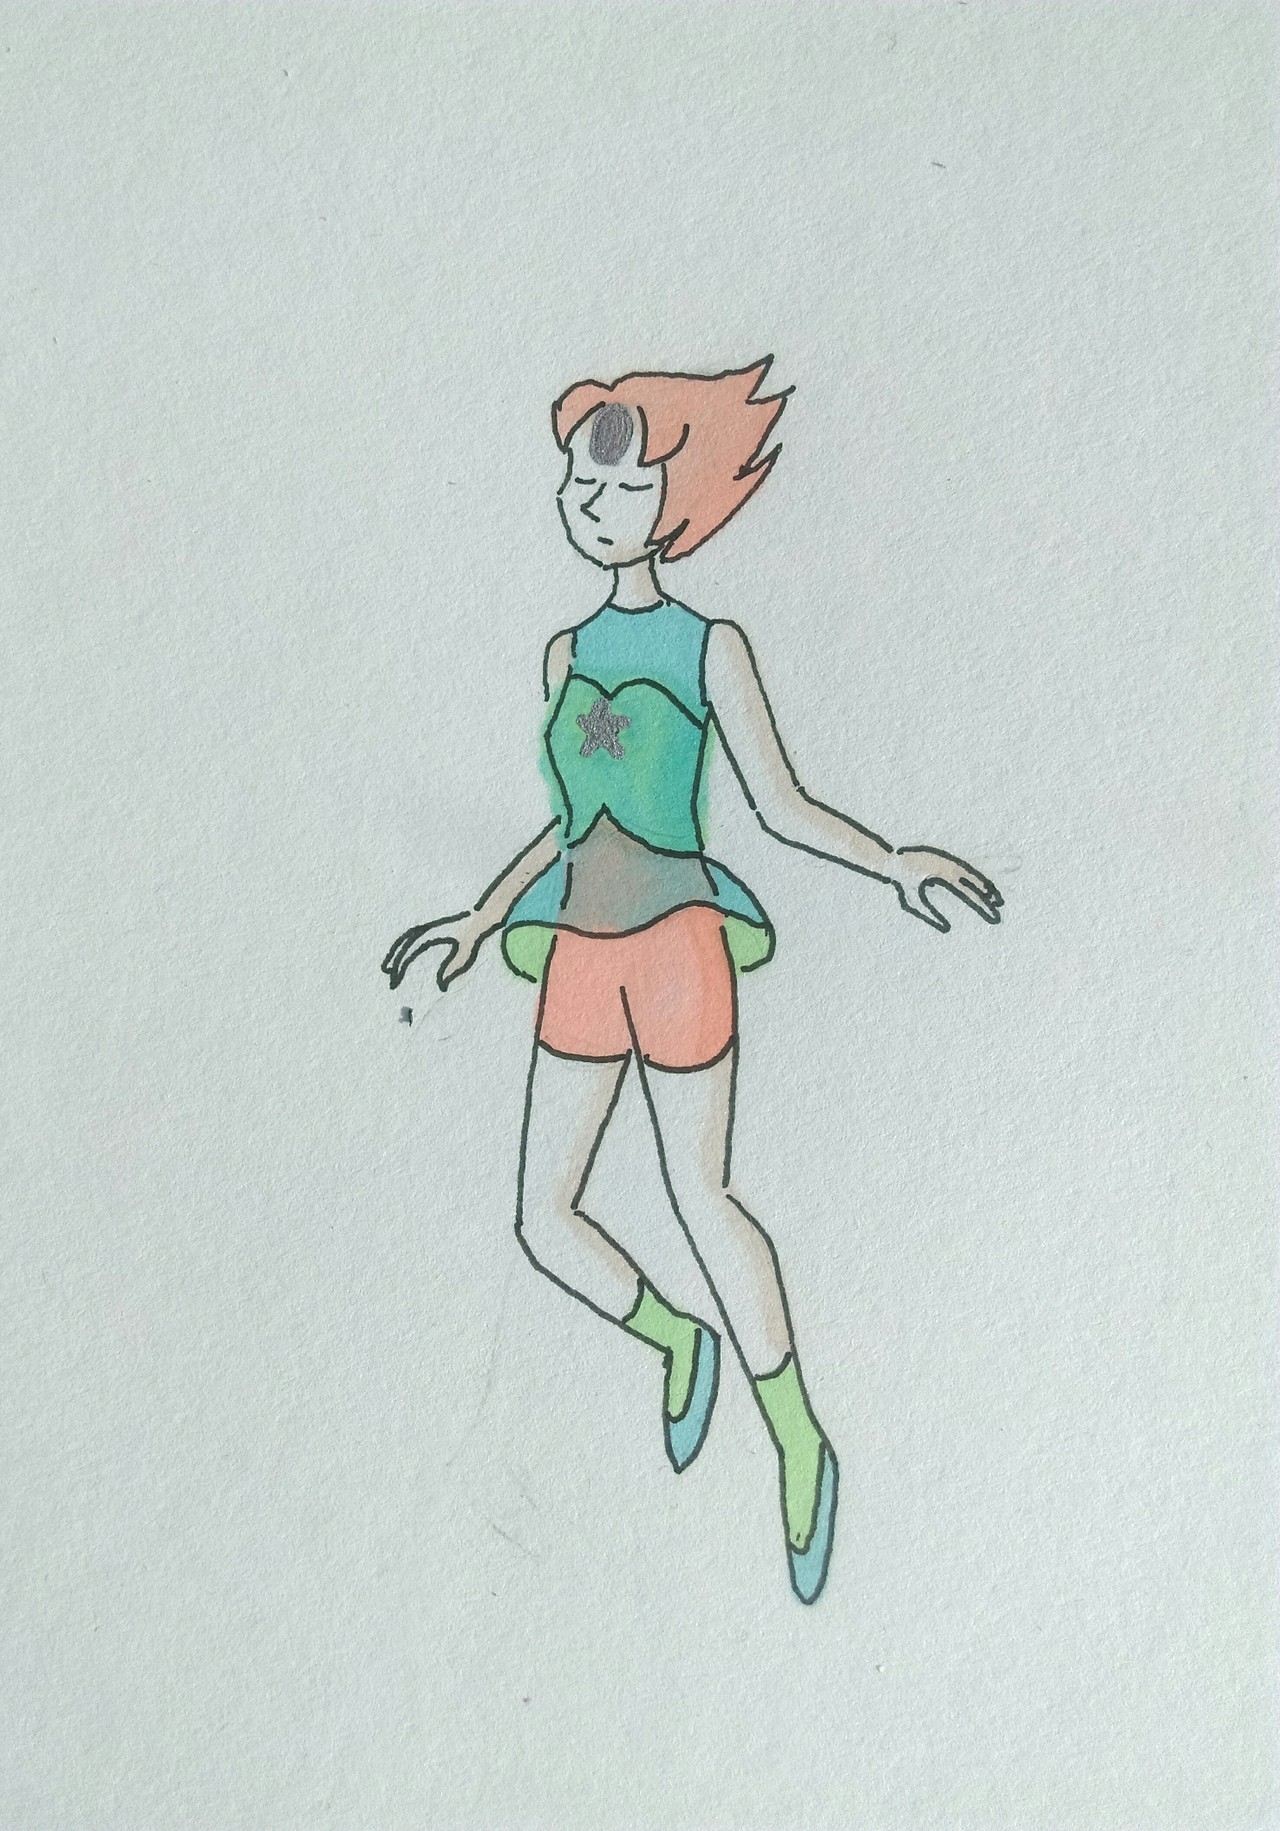 pearl is my favourite gem!